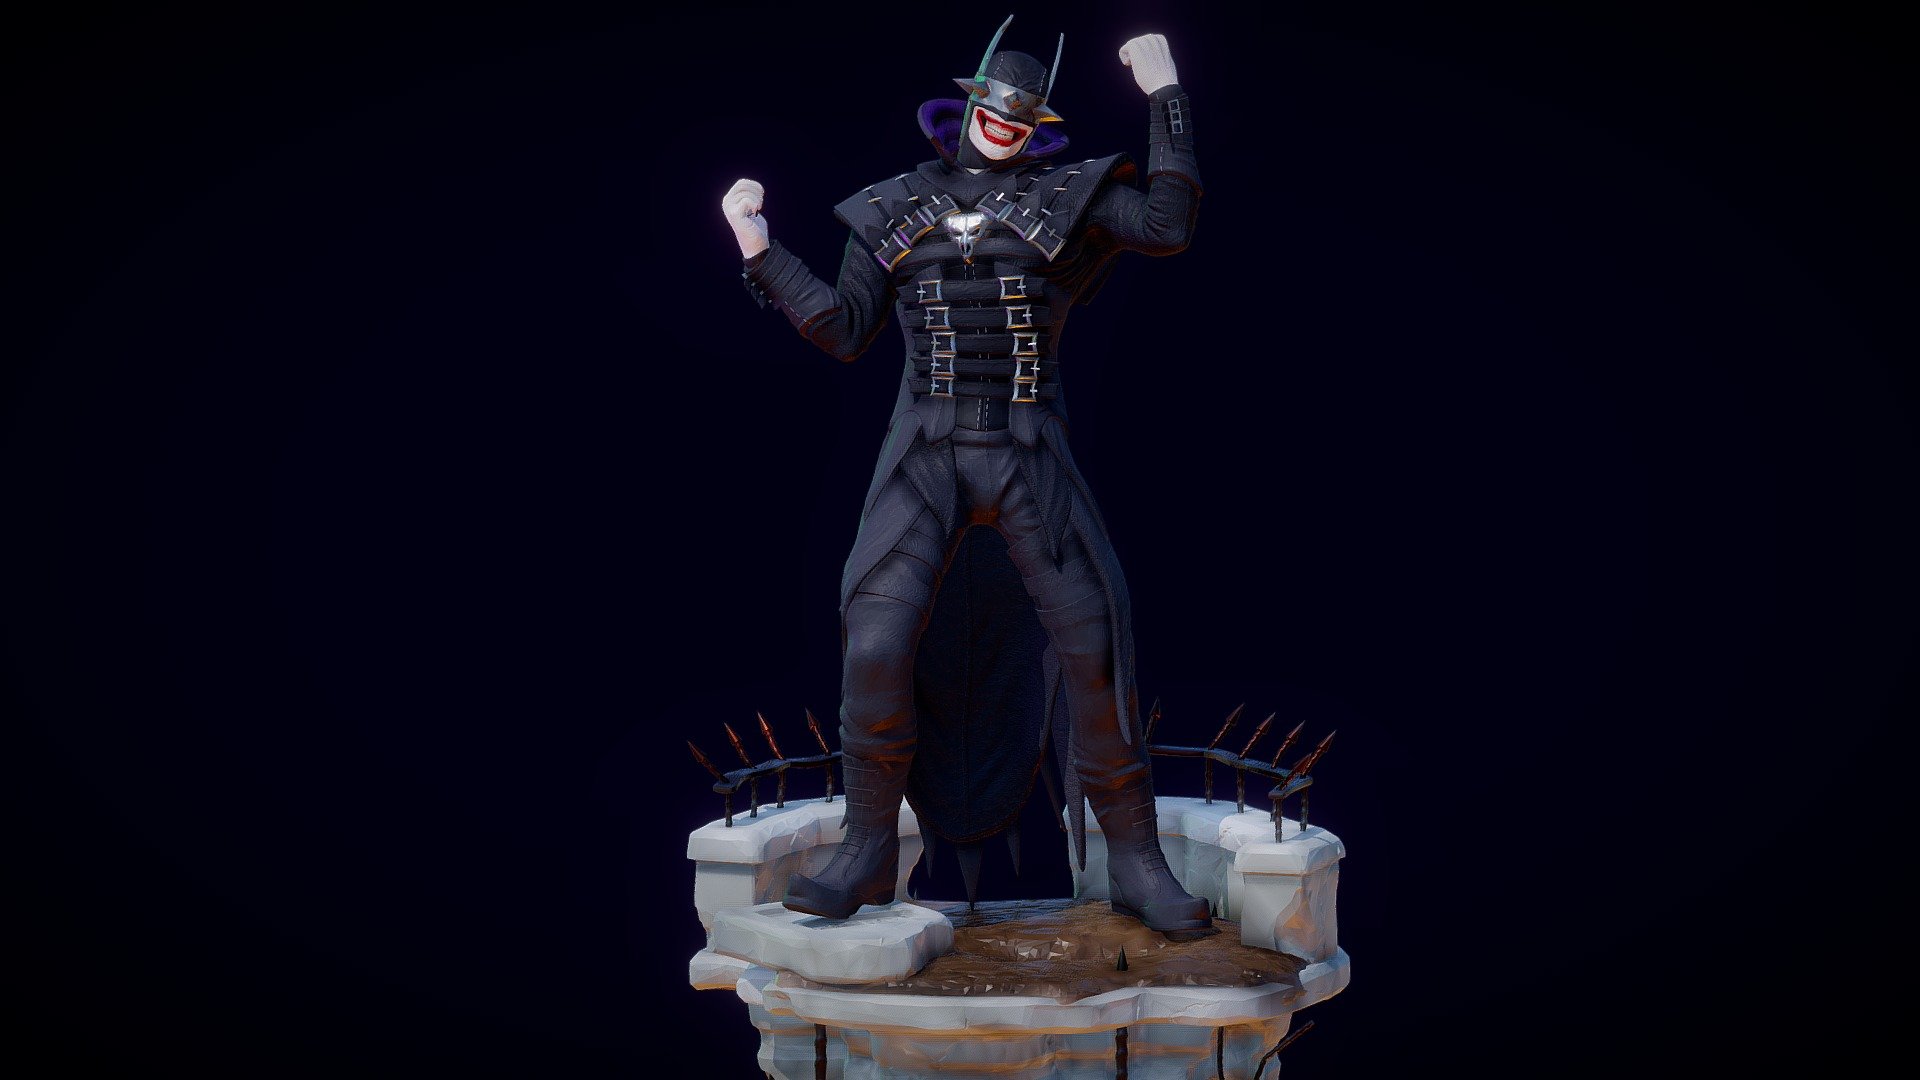 i learned a lot in this modeling process, it was a challenge to myself and i am really happy with the result
follow me on Instagram: https://www.instagram.com/3d.moonn/?hl=pt-br - batman who laughs - 3D model by 3Dmoonn 3d model